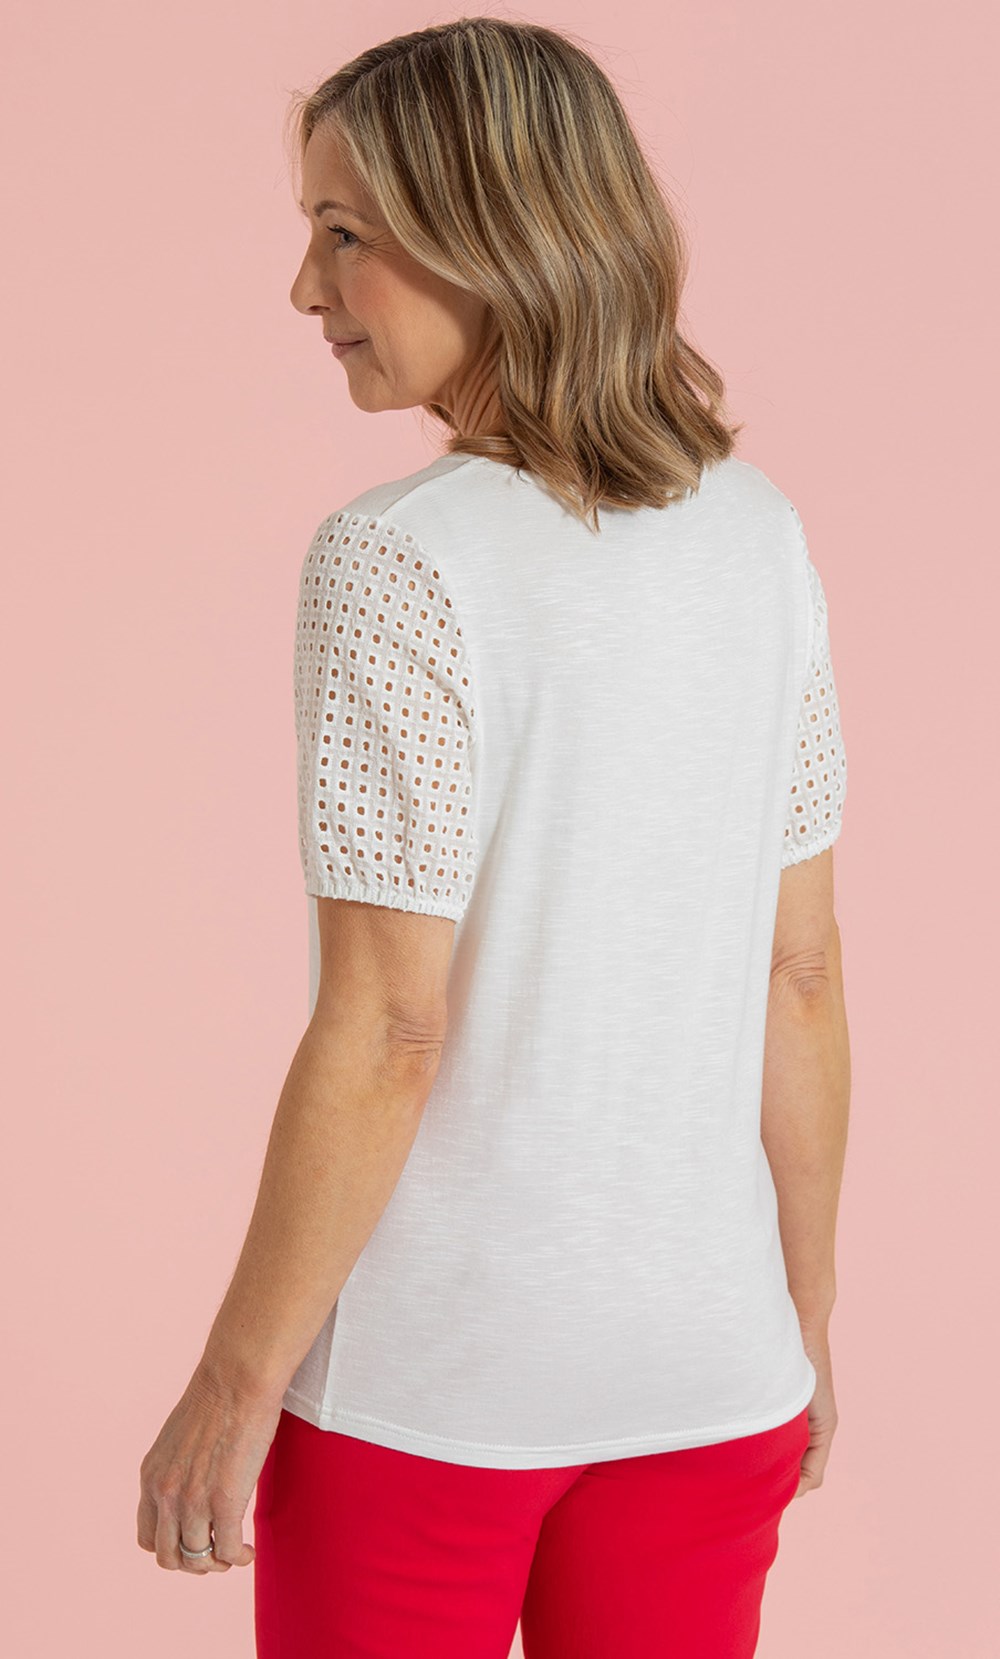 Anna Rose Eyelet Embroidered Sleeve Top